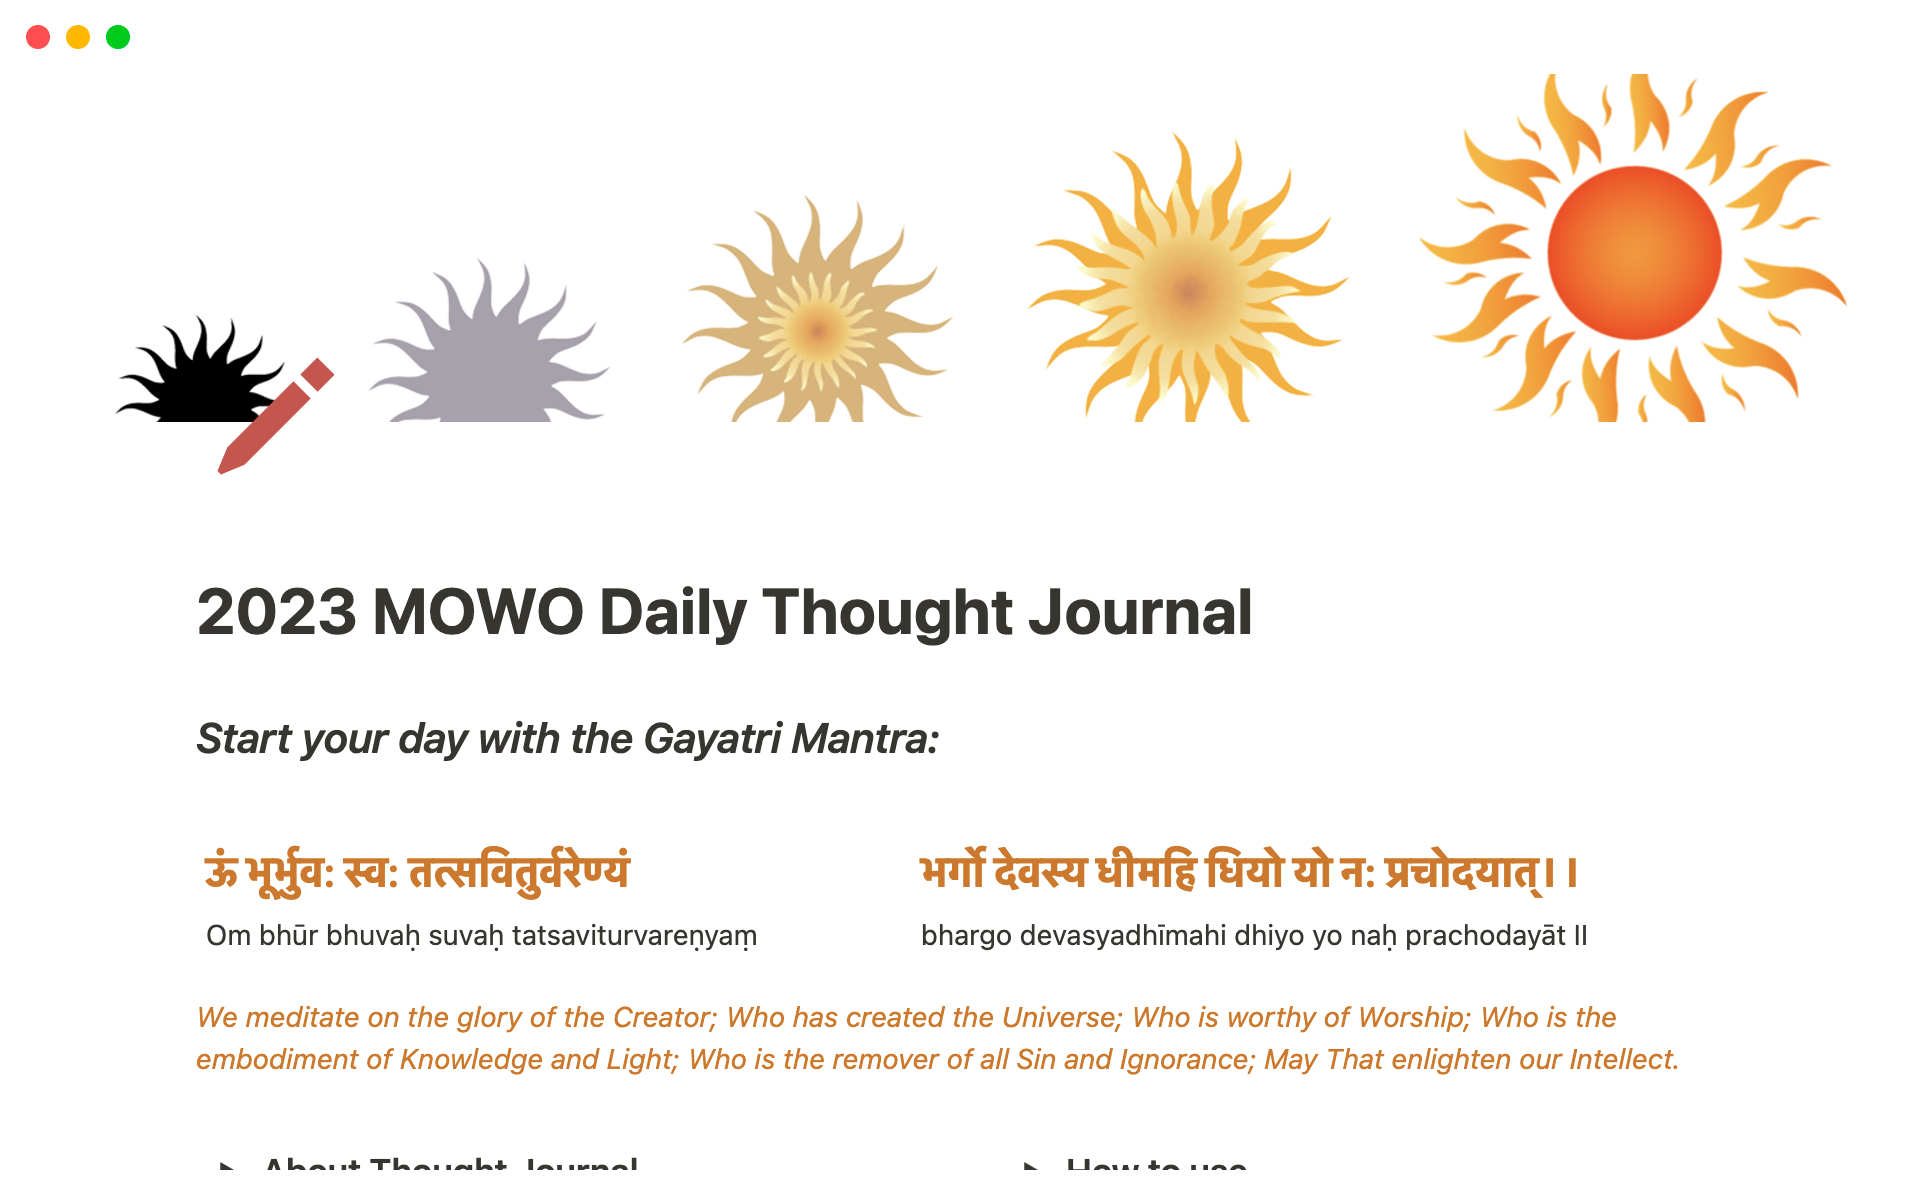 This is a Thought Journal - a tool to capture your thoughts throughout the day